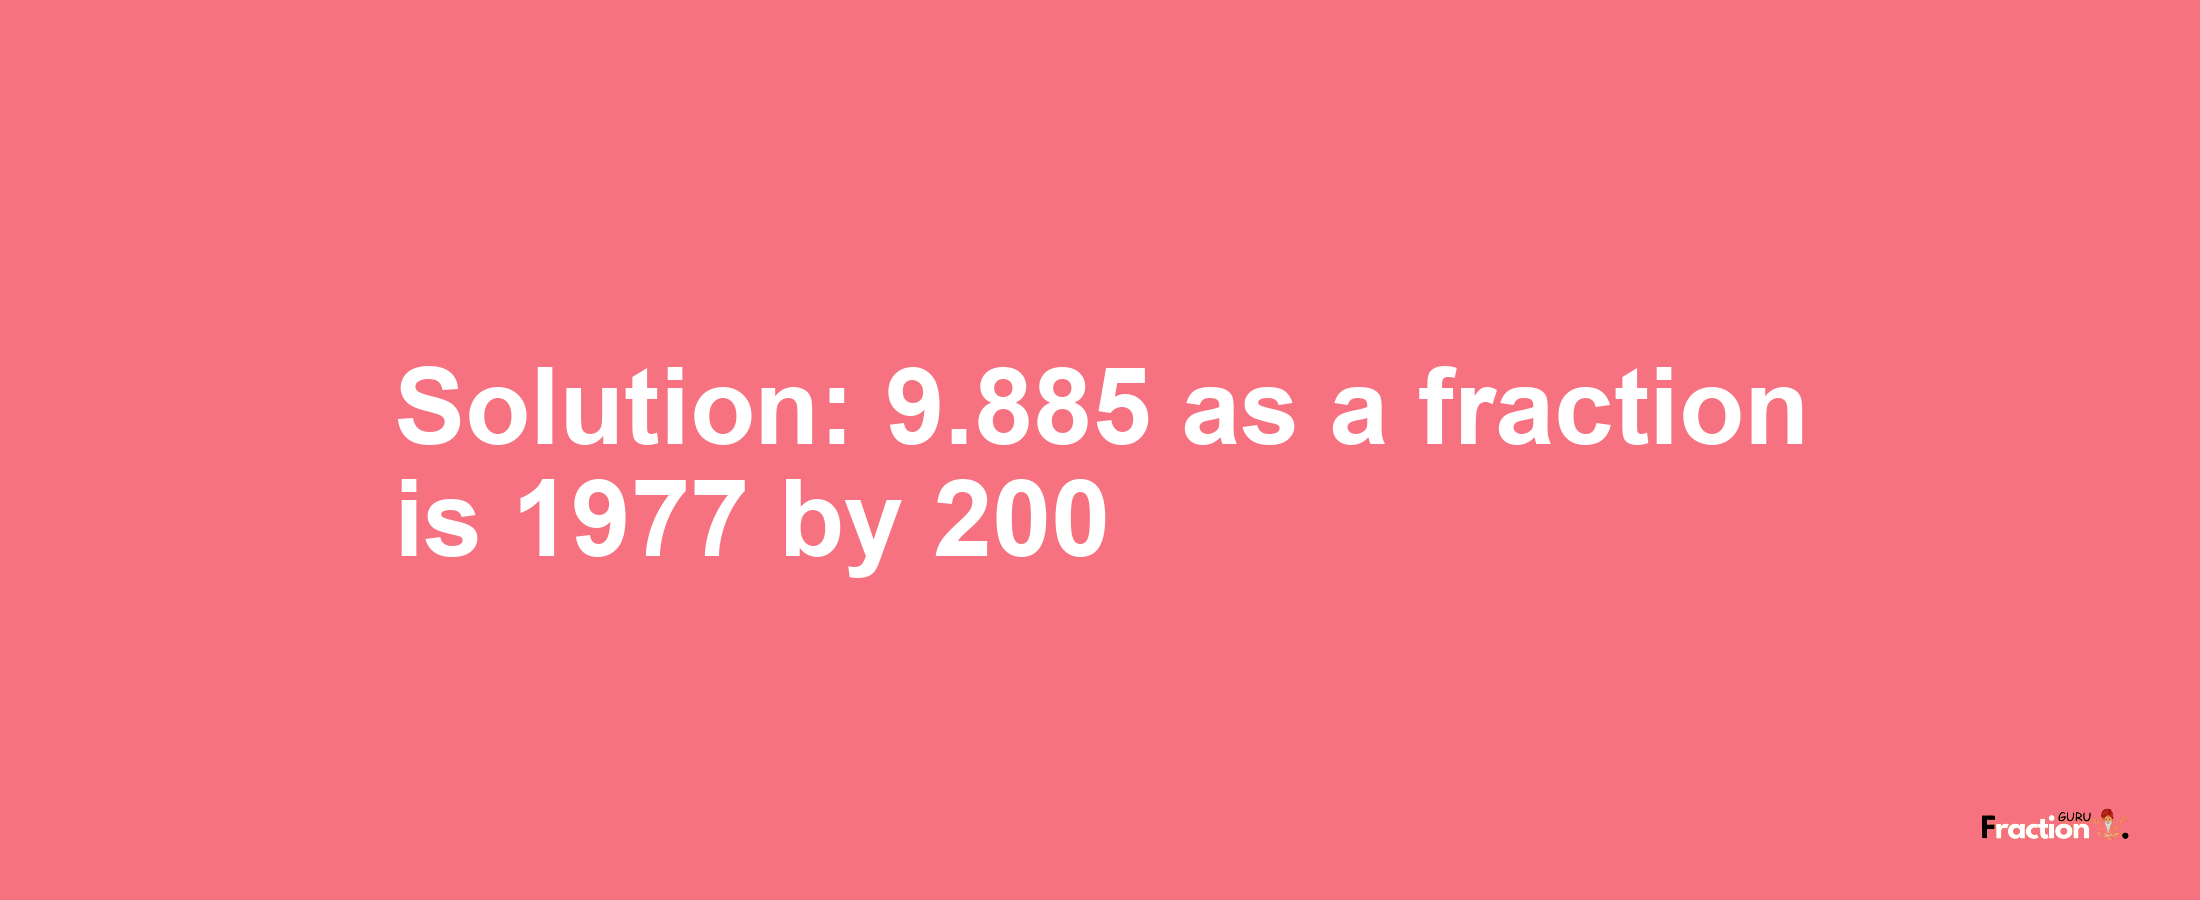 Solution:9.885 as a fraction is 1977/200